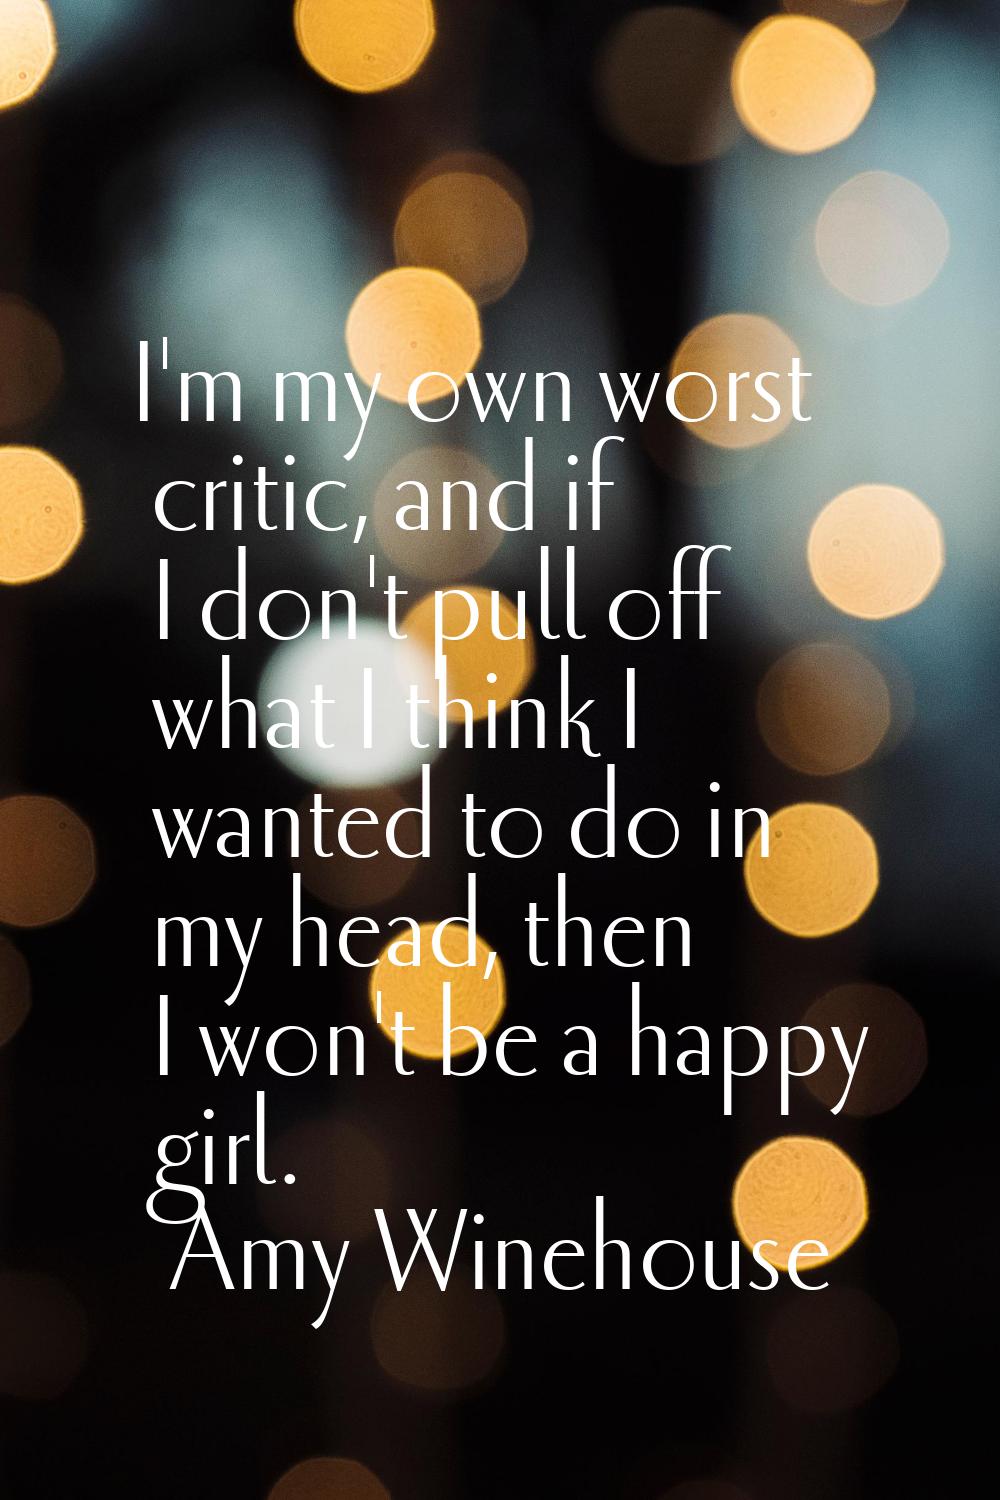 I'm my own worst critic, and if I don't pull off what I think I wanted to do in my head, then I won